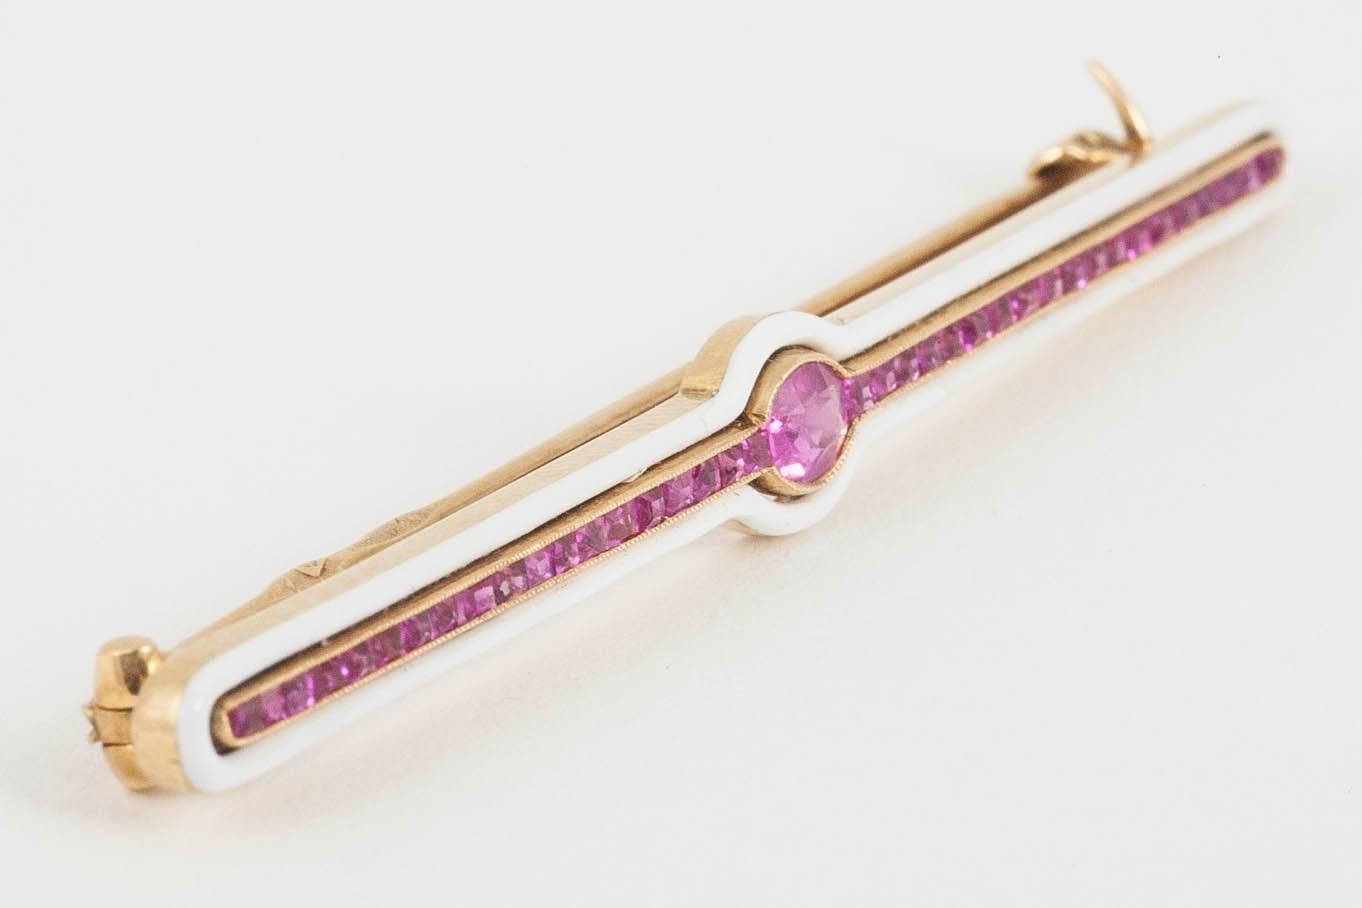 A 14 karat yellow gold antique brooch of bar shape, set with Burma rubies, surrounded with white enamel. Russian marks.
Measures 4mm in height x 58mm in length. 
Antique piece (over 100 years old) in the Edwardian style.
Early 20th century, Russian